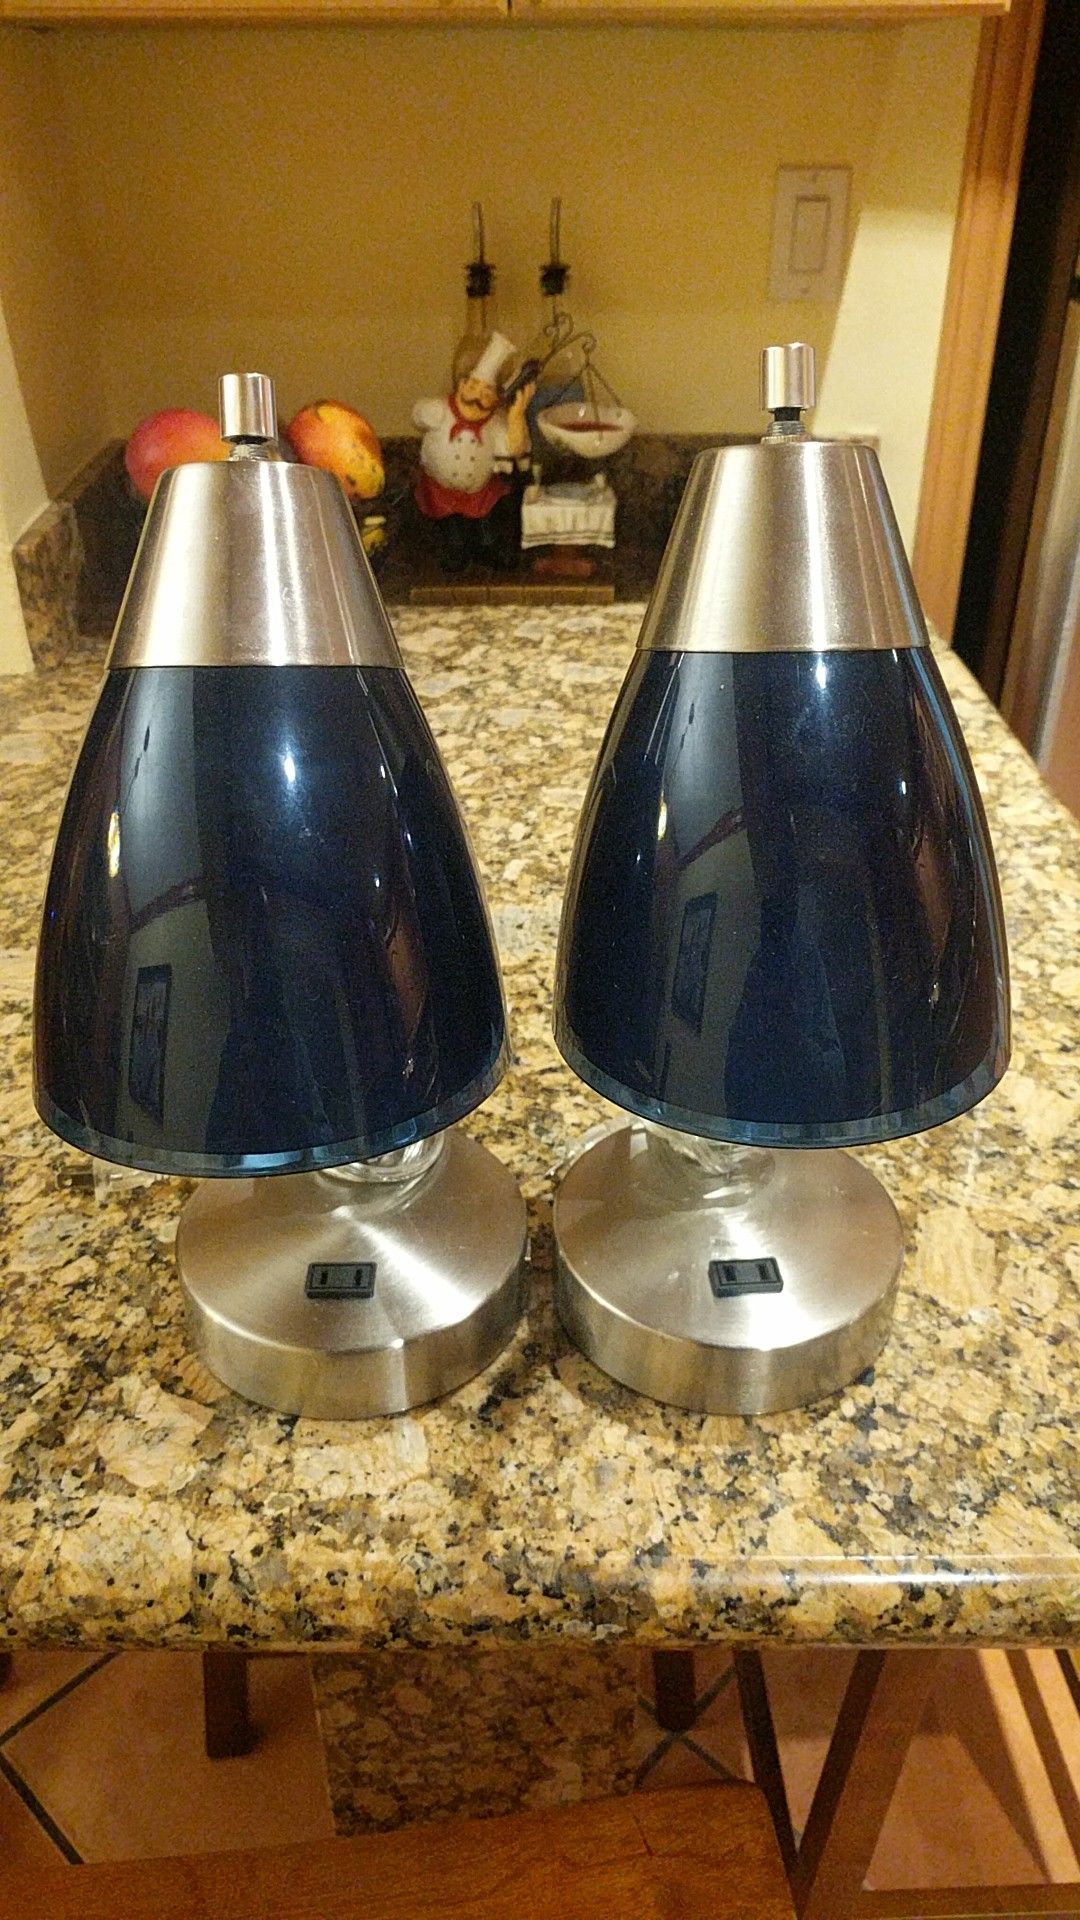 Twin Desk Stainless Steel Lamps with USB and outlet connections